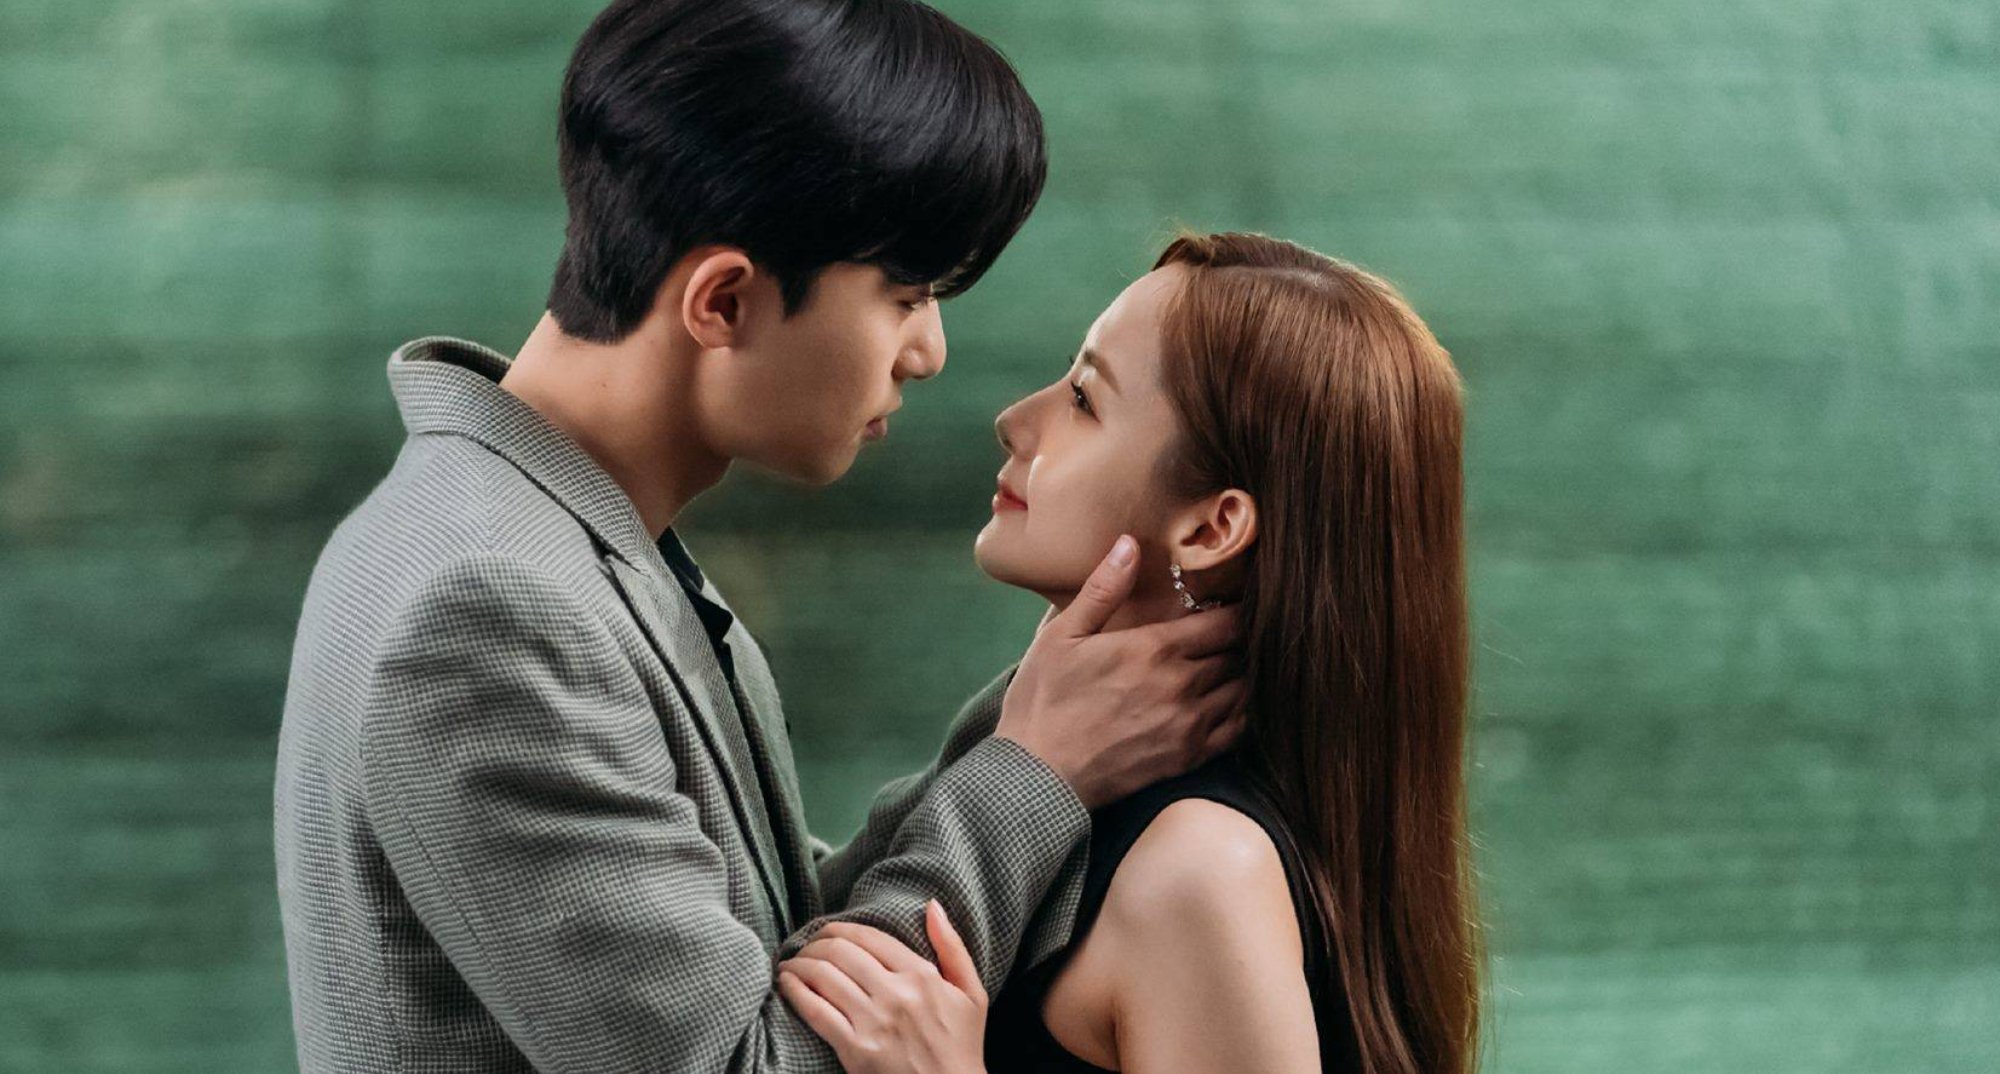 Park Seo-joon and Park Min-young in Youtube kiss scenes for 'What's Wrong With Secretary Kim'